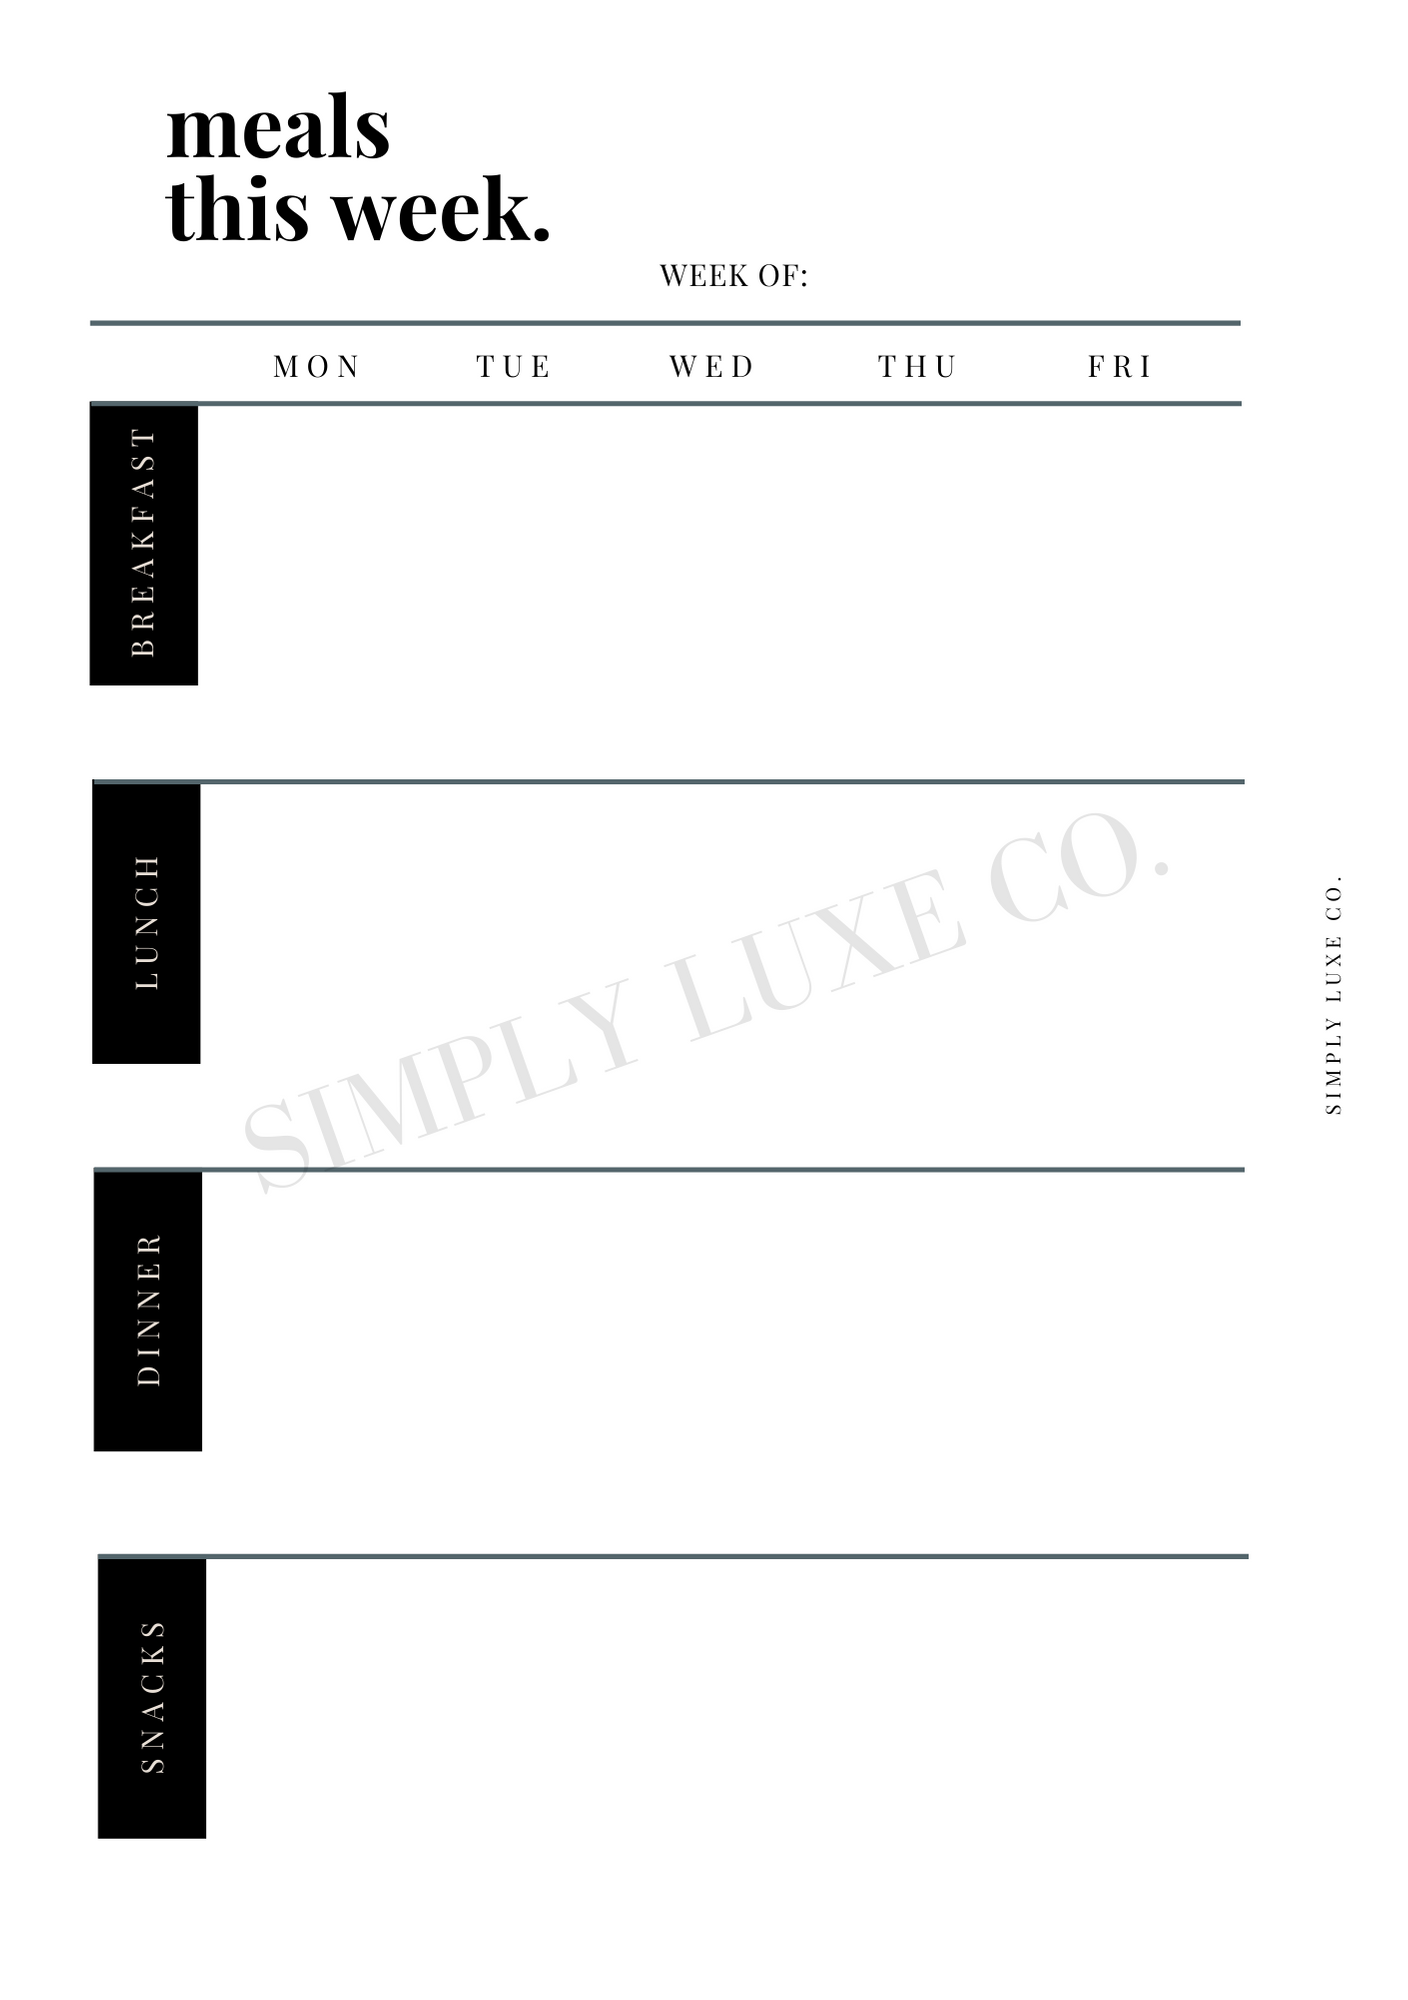 Weekly Meal Planning Printable Inserts - Available in 2 colors